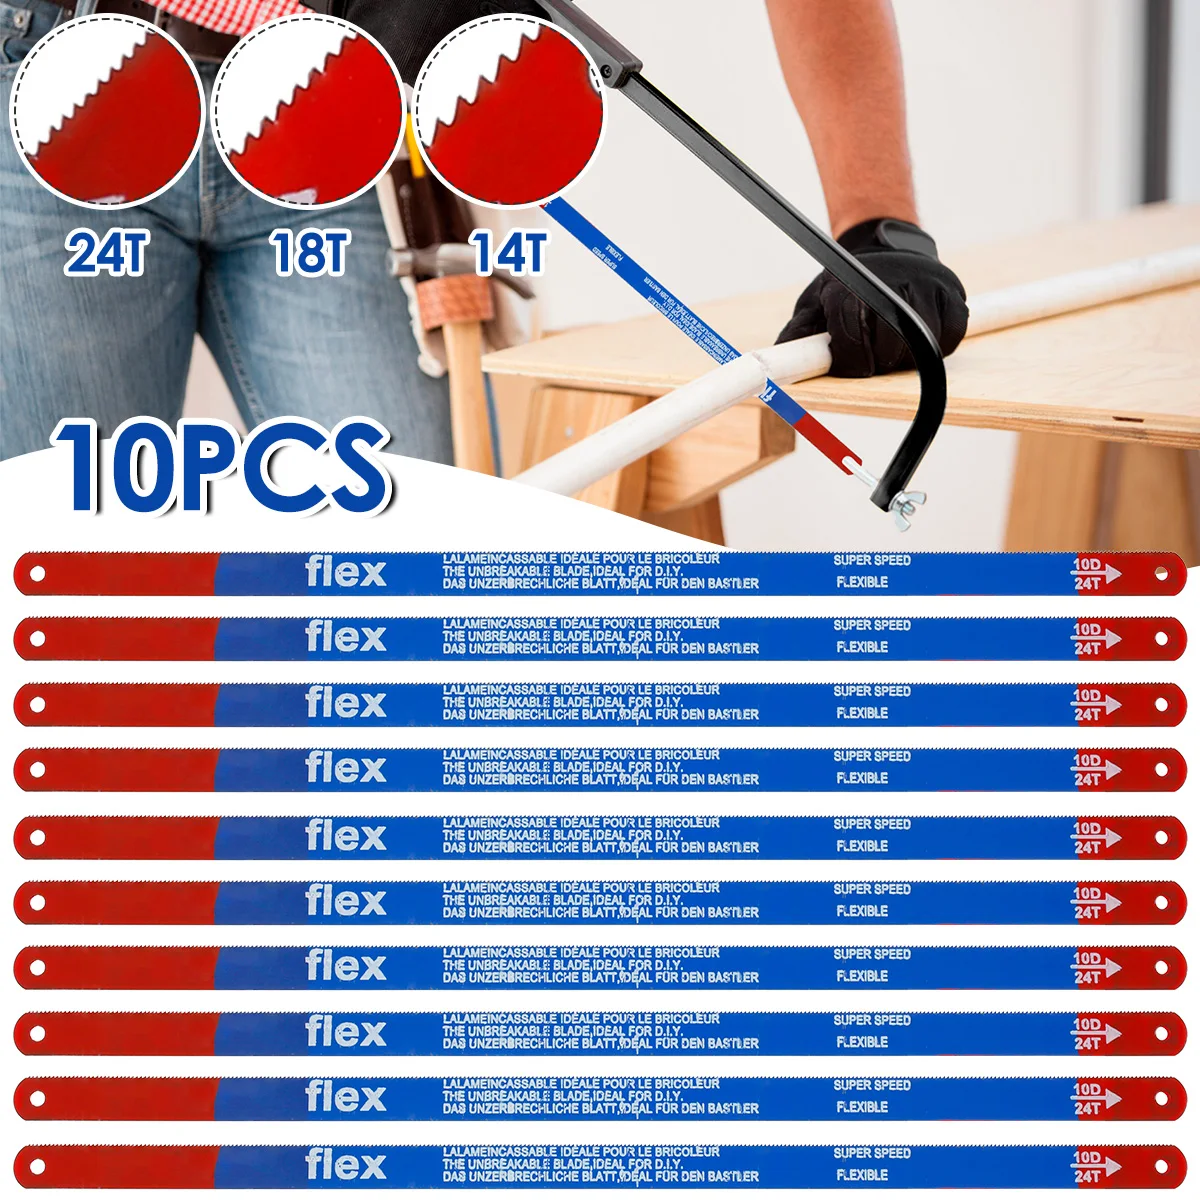 10pcs Hacksaw Blades Set Replacement Jig Fast Cutting 11.8 Inch Saw Blade for Bamboo Bone Frozen Meat PVC Pipe Cutting